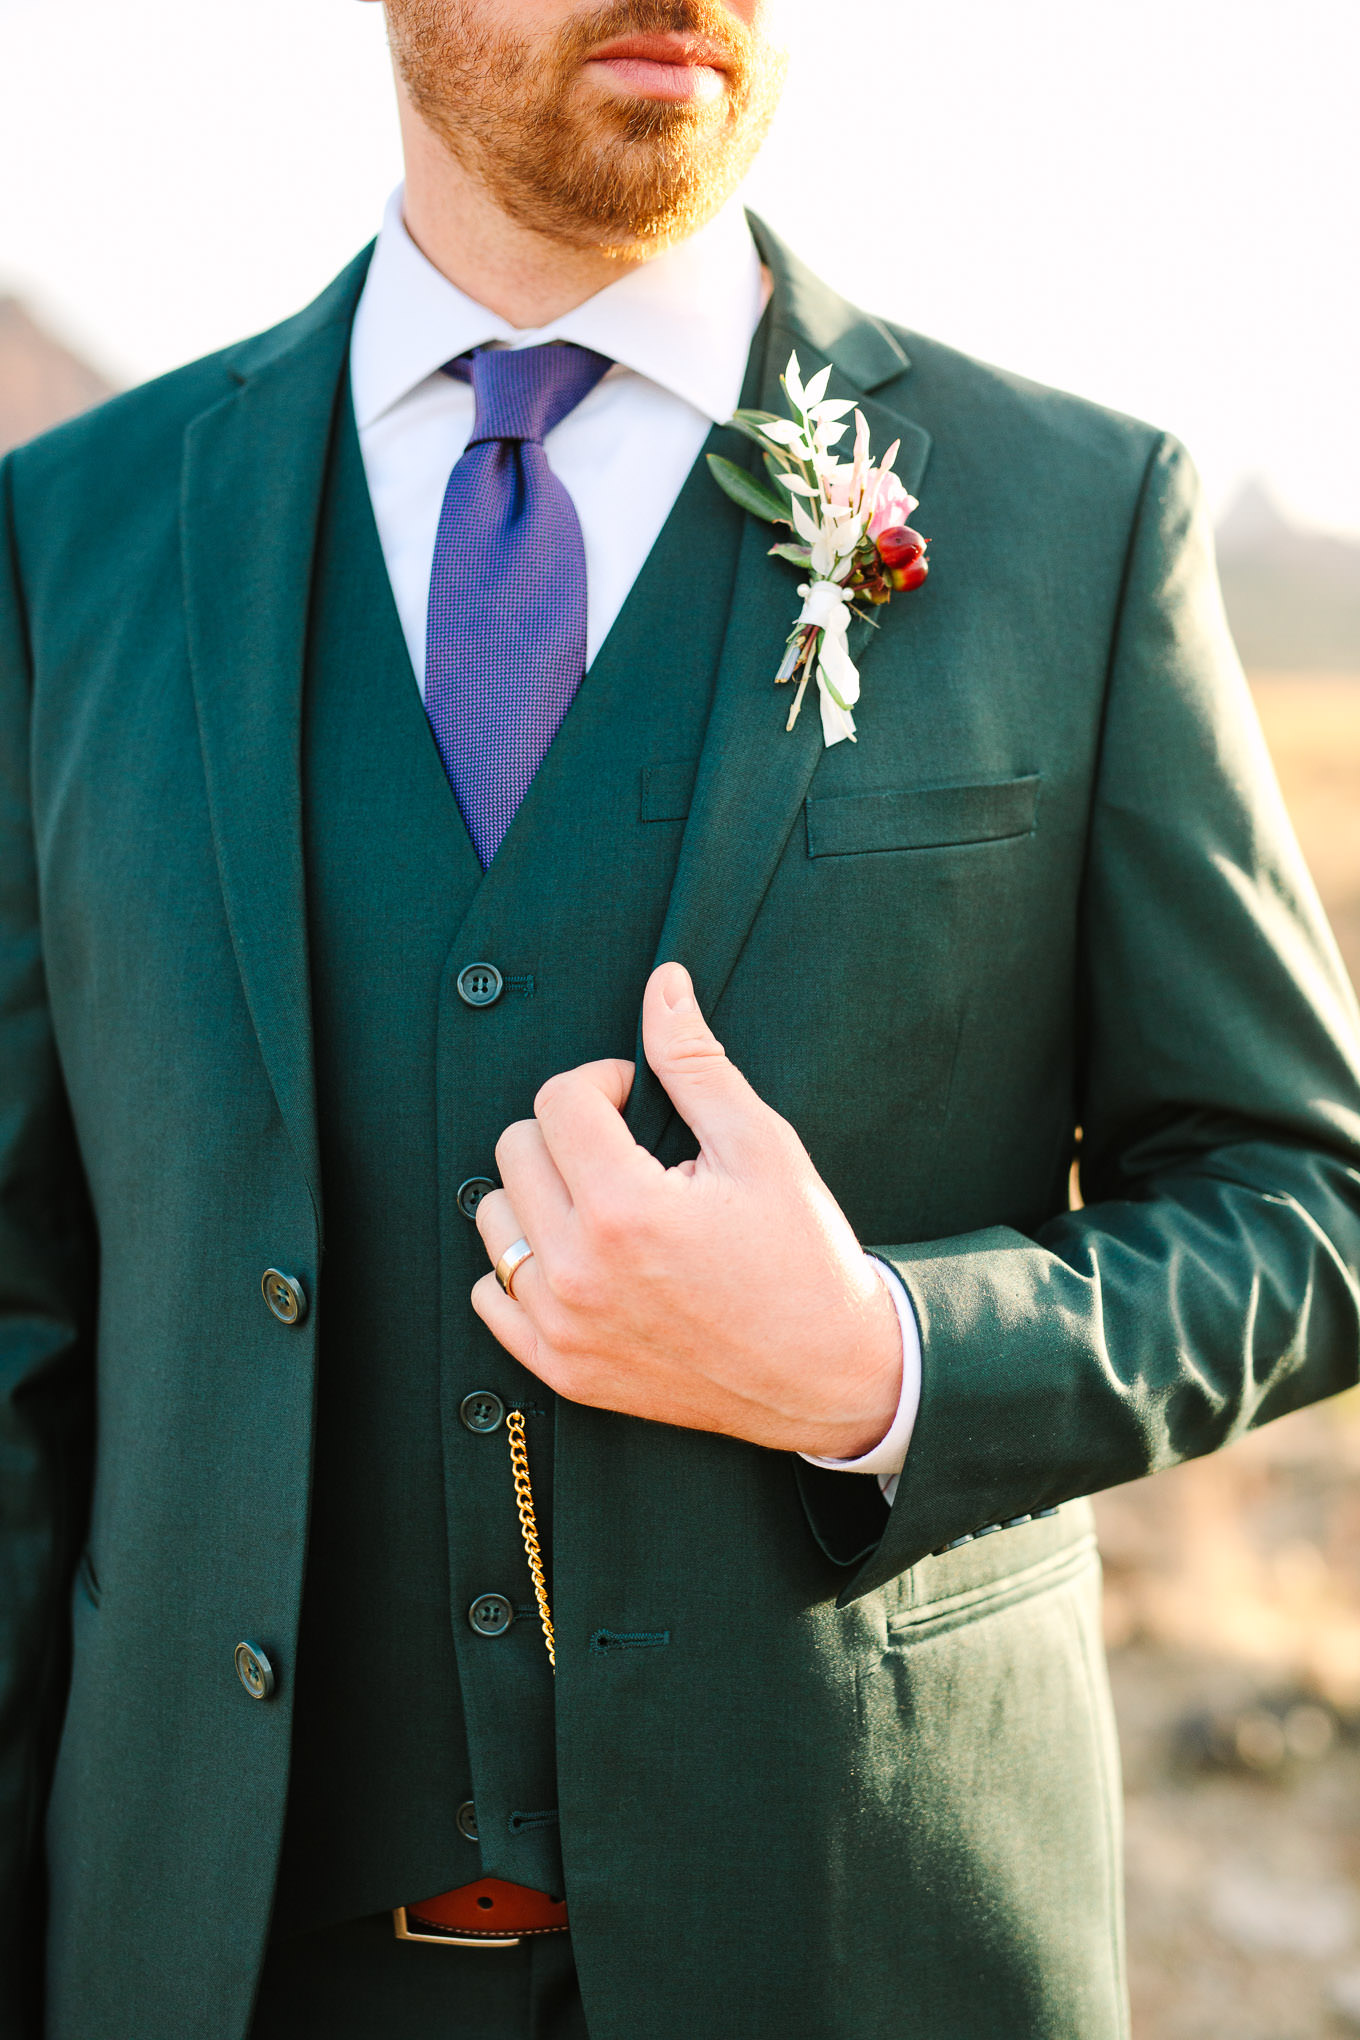 Groom portrait in green suit | Zion Under Canvas camping elopement at sunrise | Colorful elopement photography | #utahelopement #zionelopement #zionwedding #undercanvaszion #sunriseelopement #adventureelopement  Source: Mary Costa Photography | Los Angeles